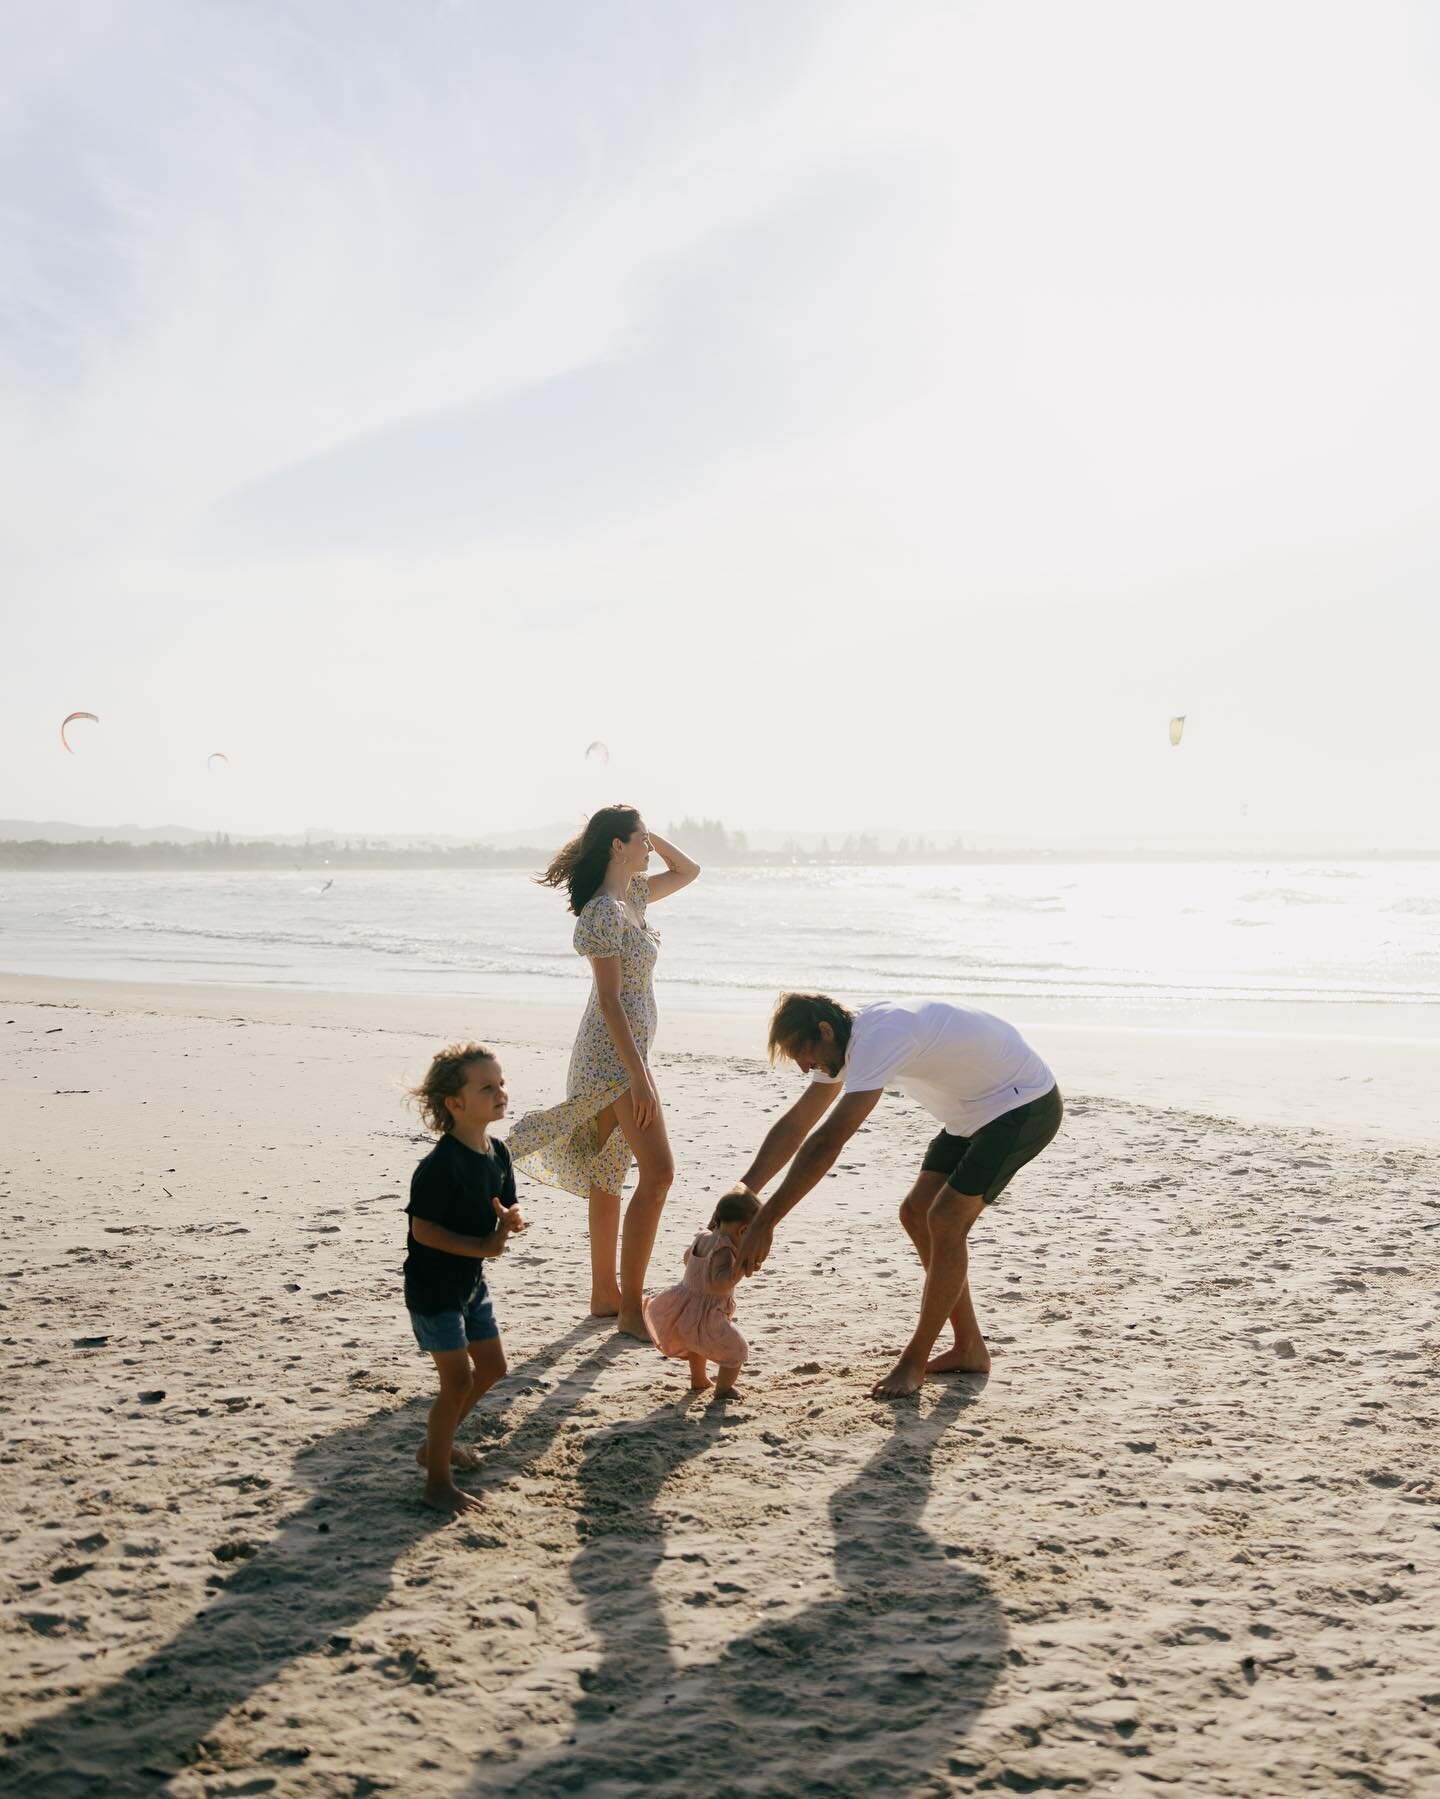 Pro surfer Owen Wright @owright and his family photographed for @airbnb